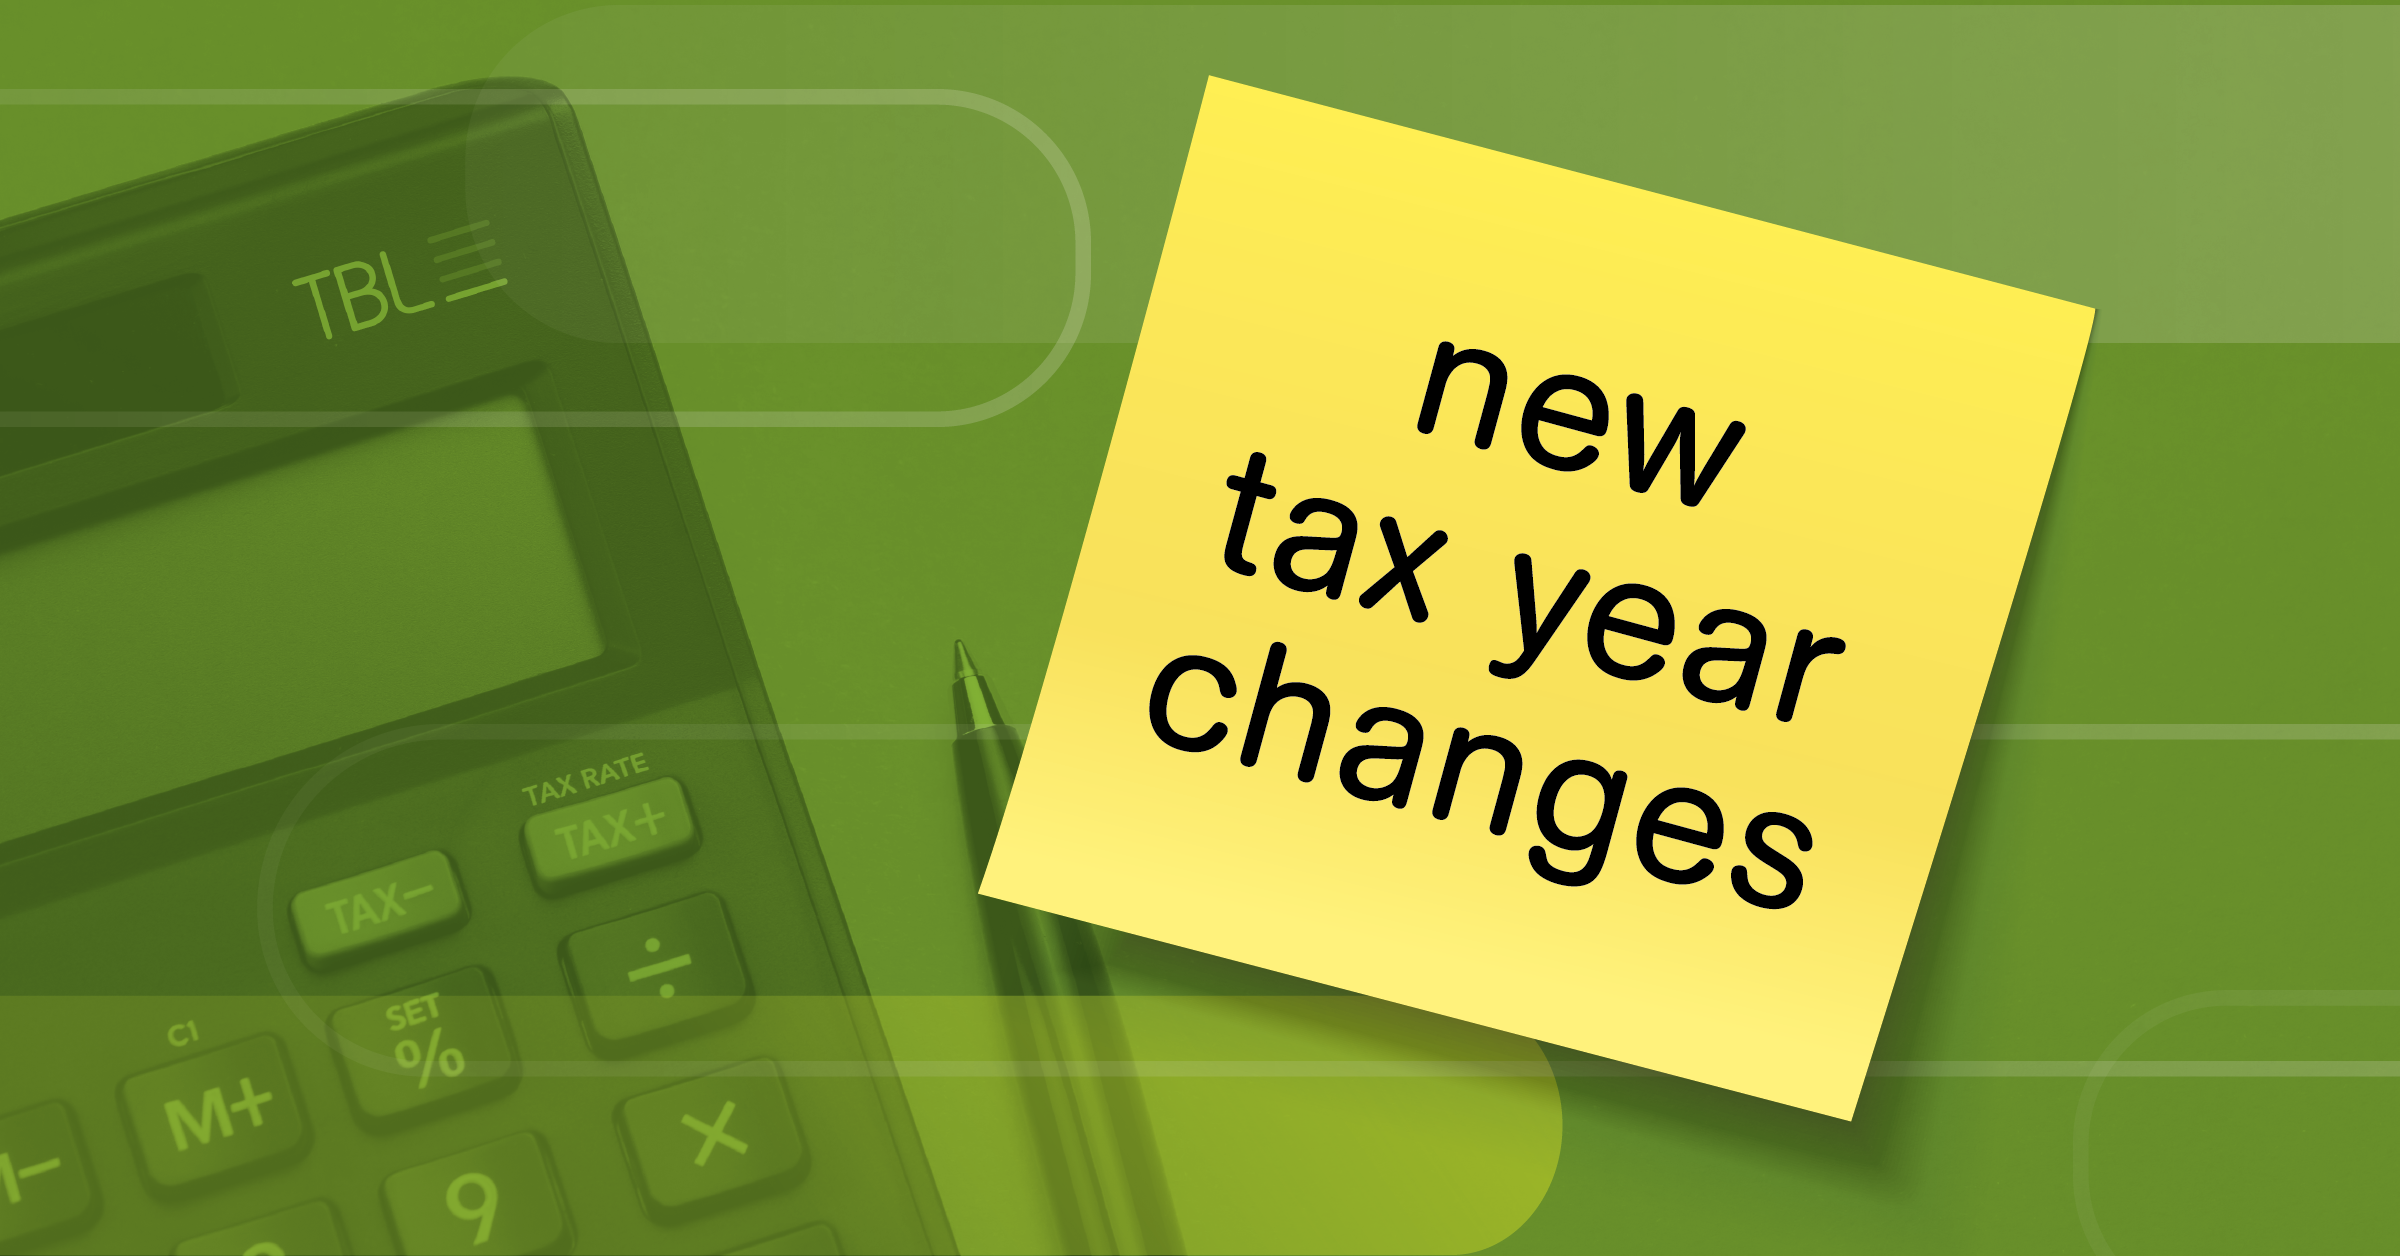 TBL Tax year changes 2019